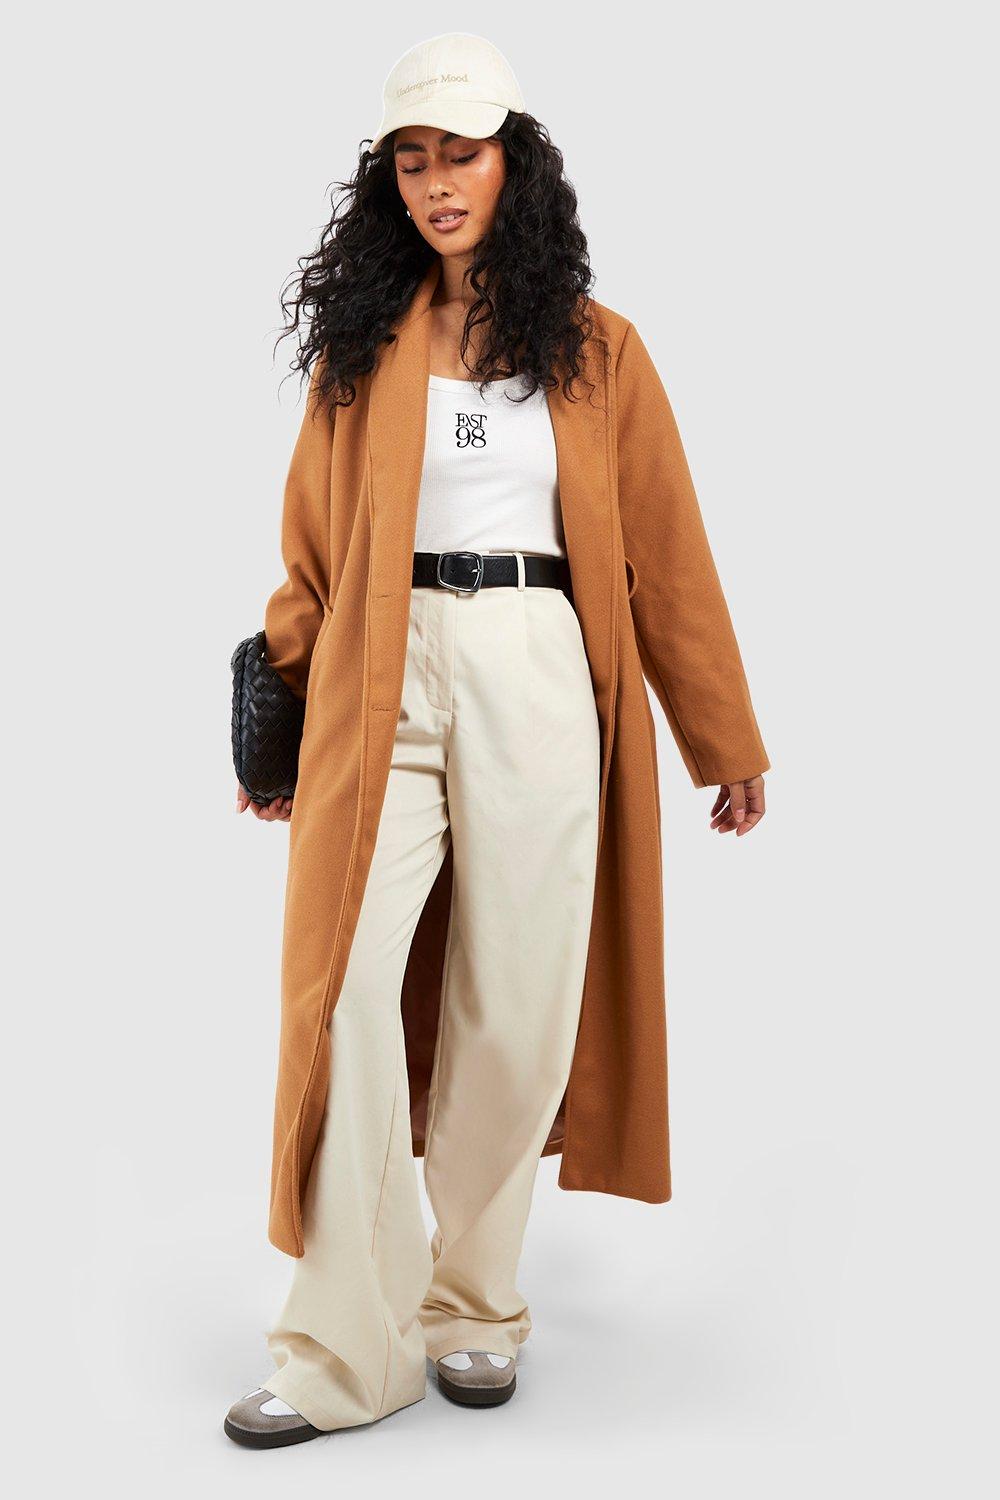 Boohoo Wool Look Coat In Camel / From a long camel coat like the